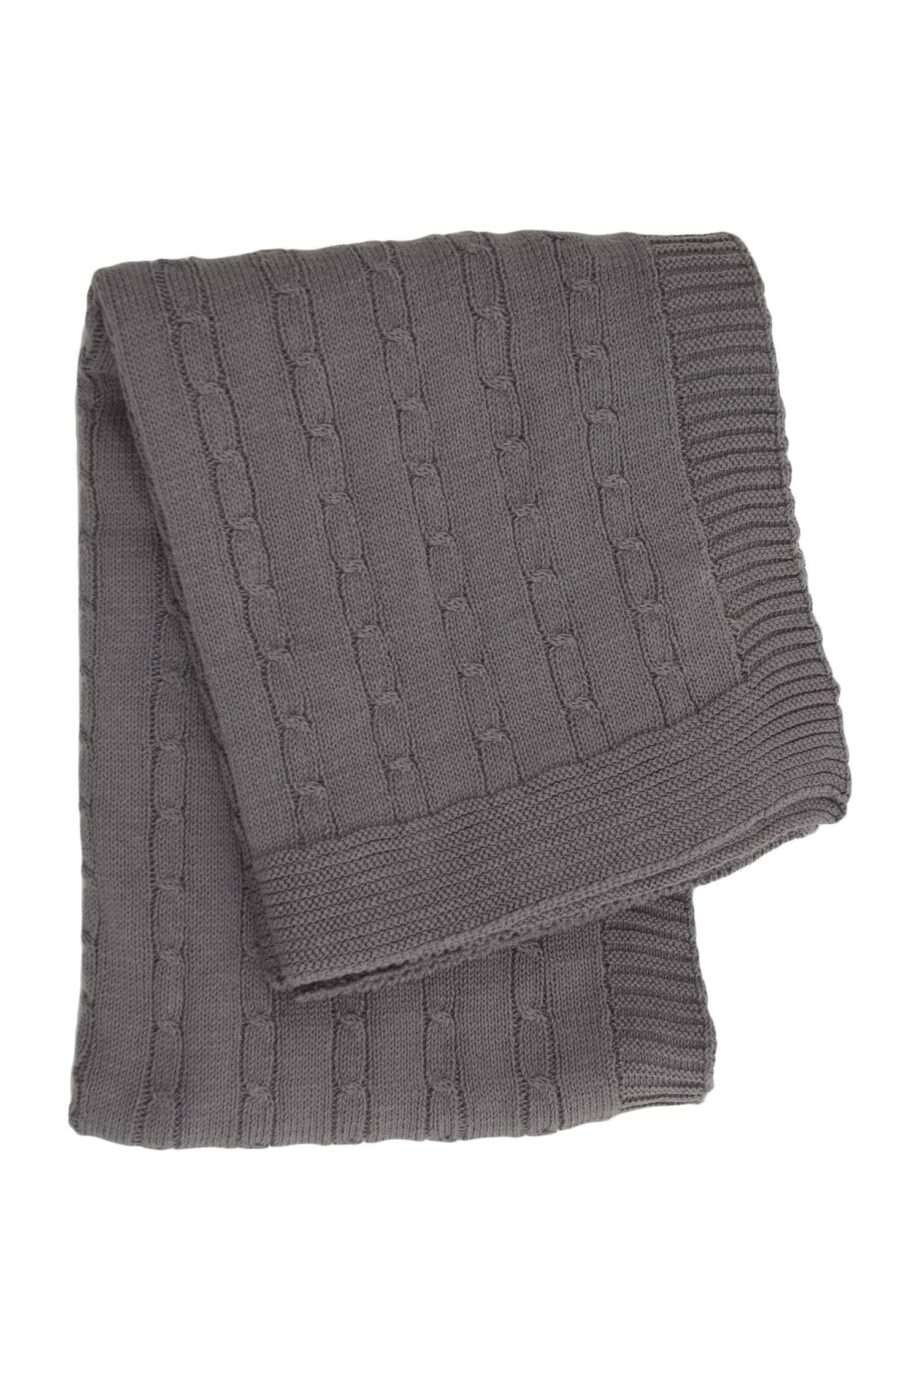 twist small grey knitted cotton little blanket small